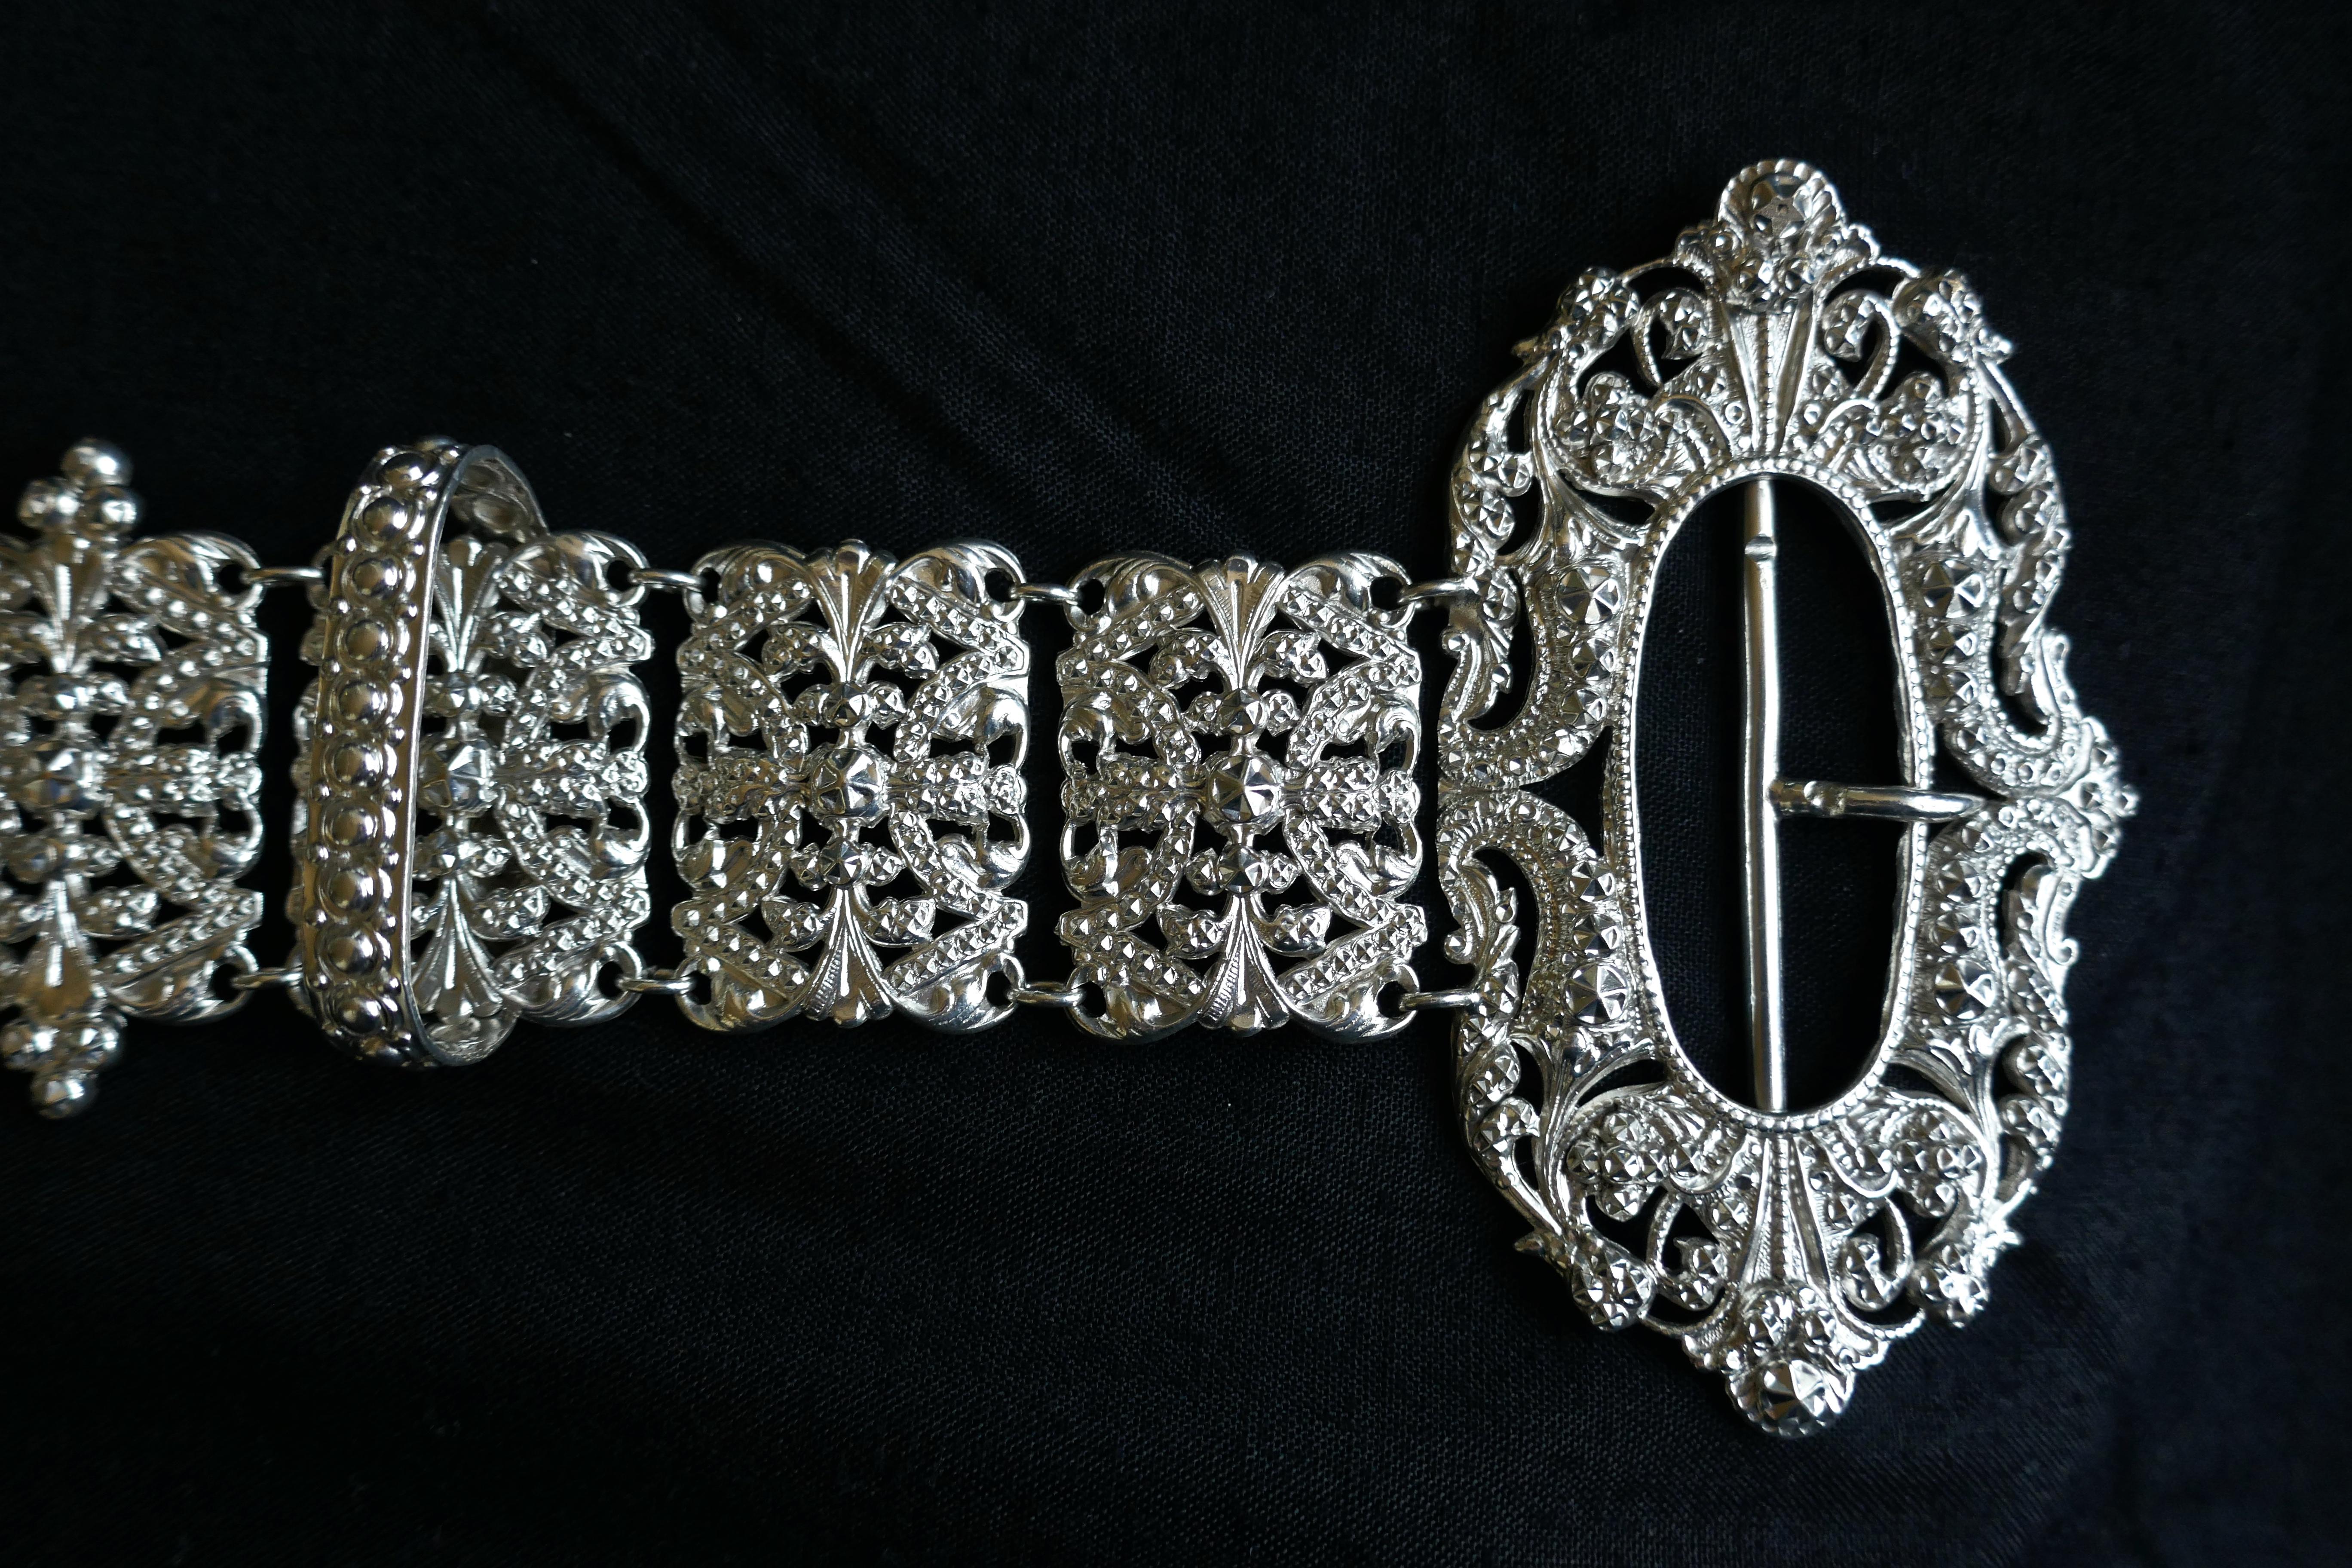 Women's French Arts and Crafts Silver Belt, Articulated Links with Chatelaine Ring For Sale